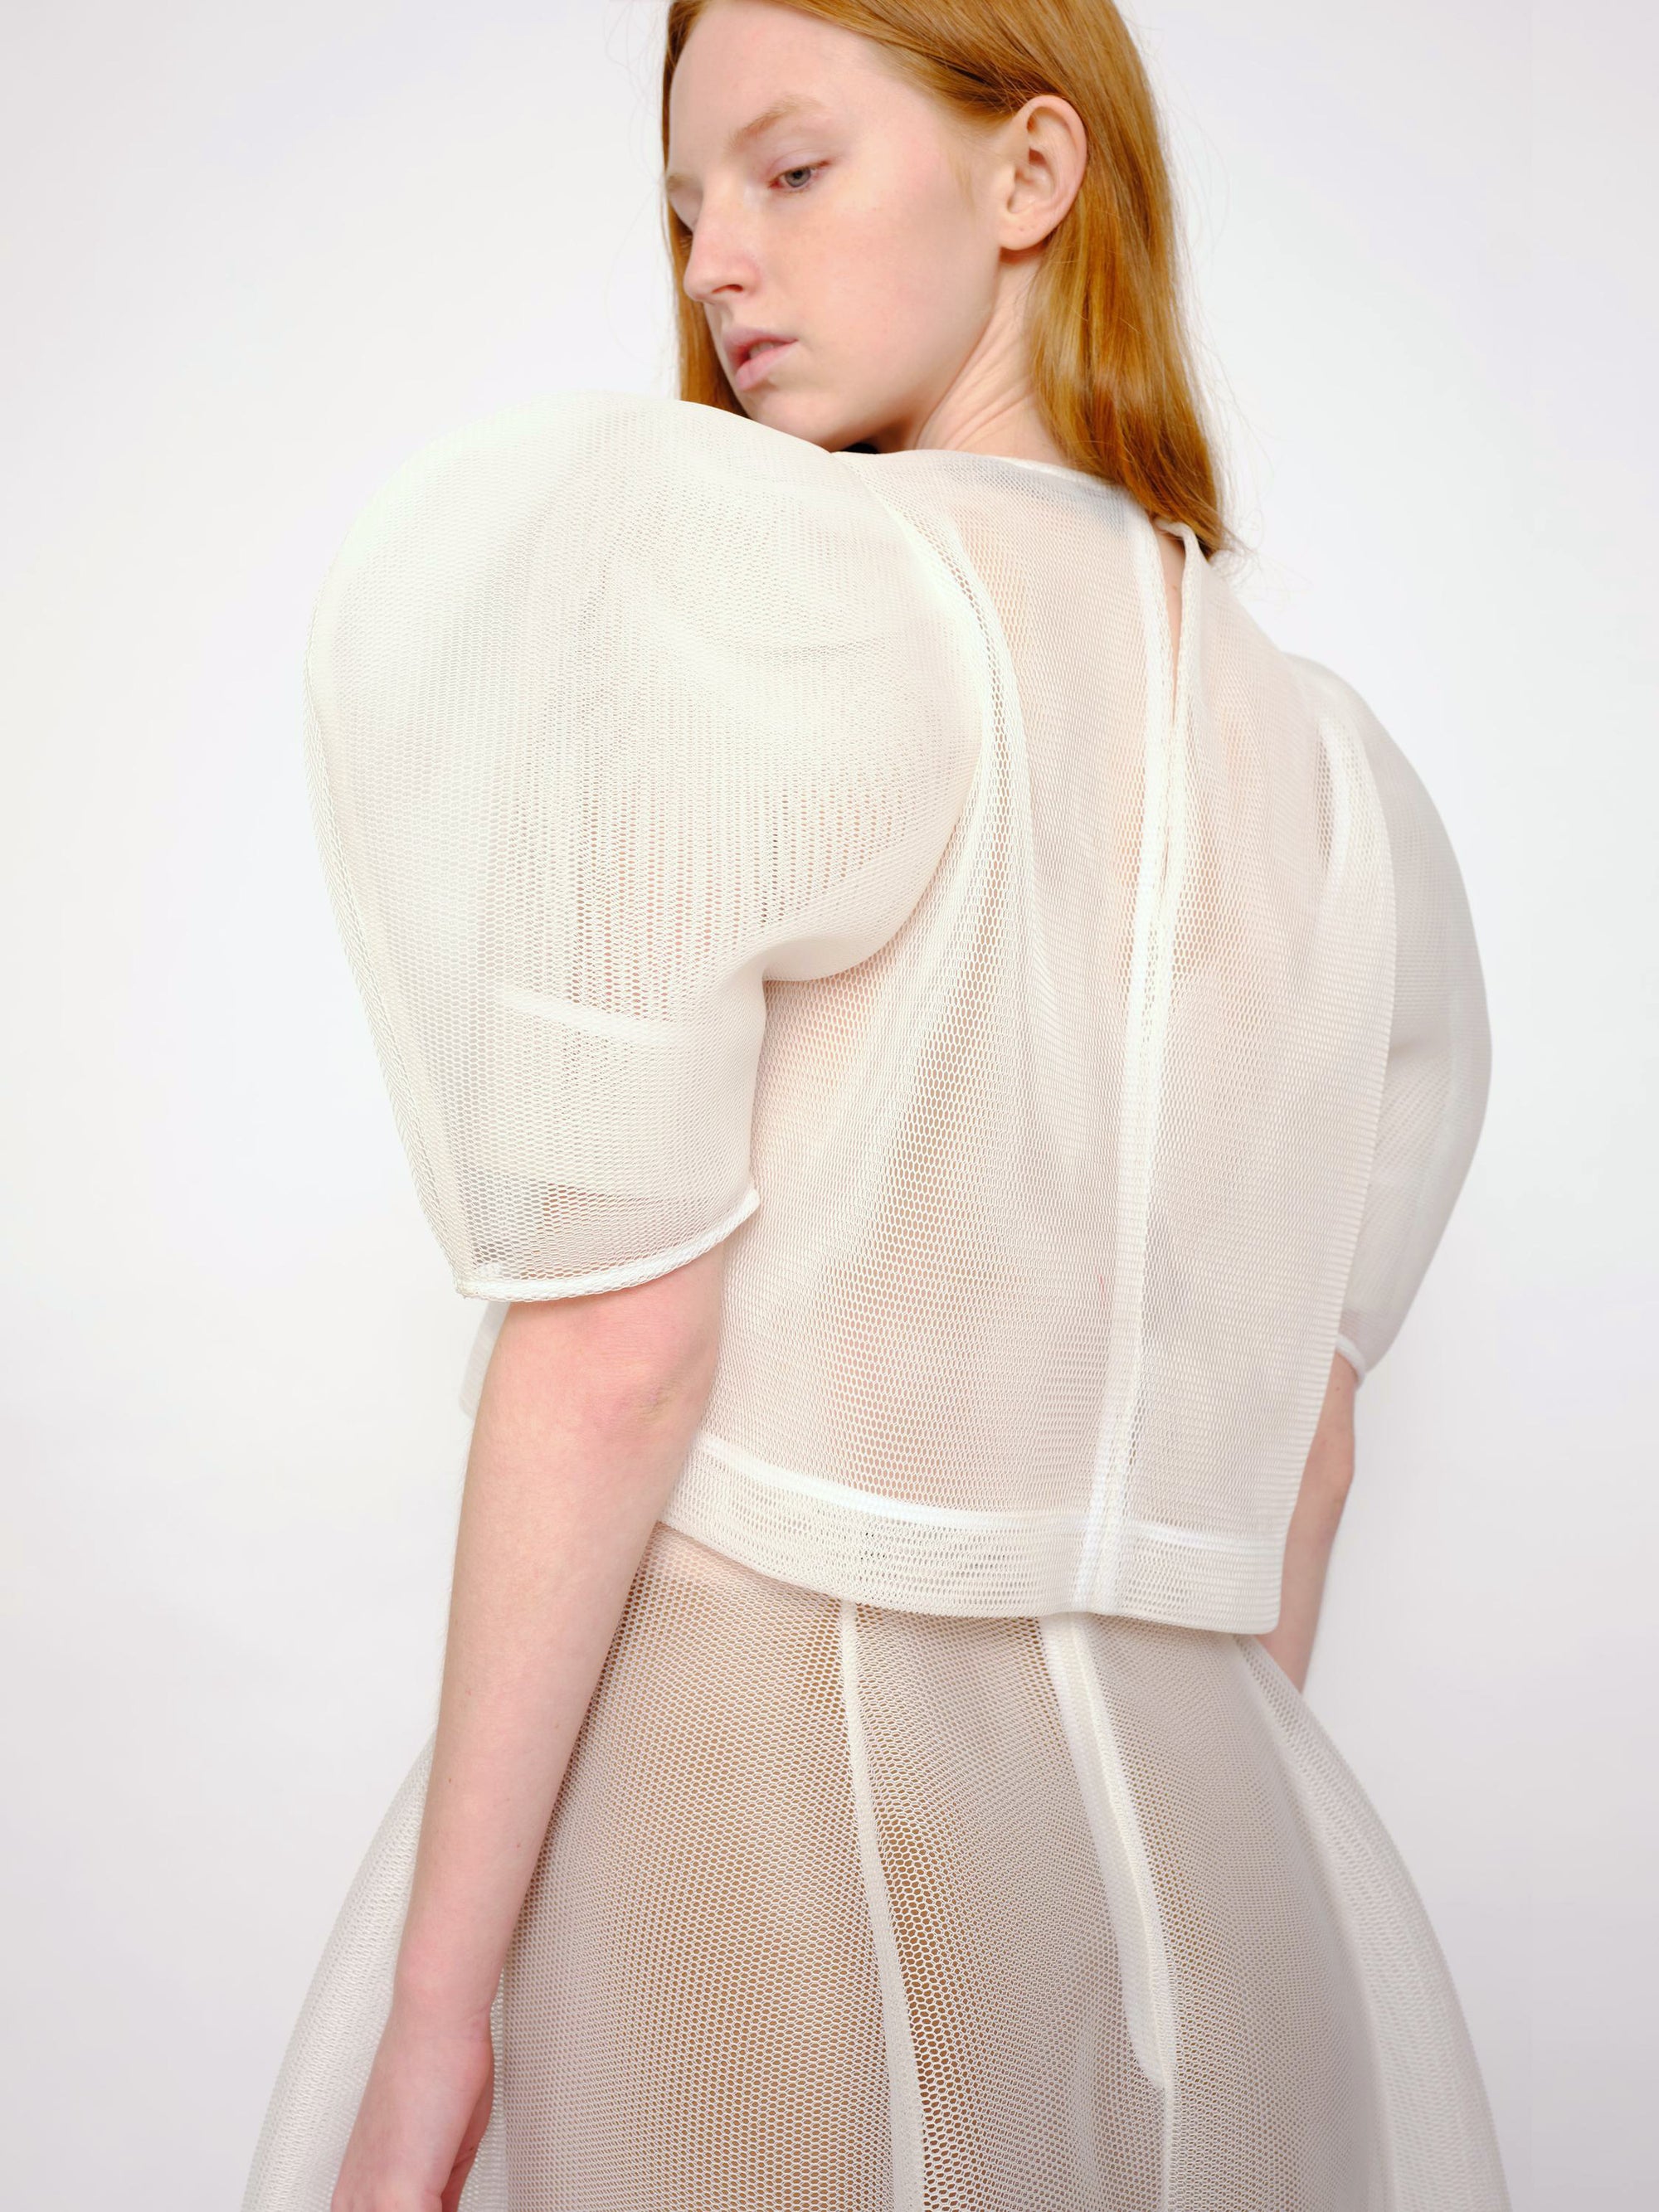 back-angle-of-a-women-with-orange-hair-looking-back-standing-in-front-of-a-white-background-wearing-Melitta-Baumeister-sheer-princess-dress-with-puffy-shoulder-made-in-a-spongy-material